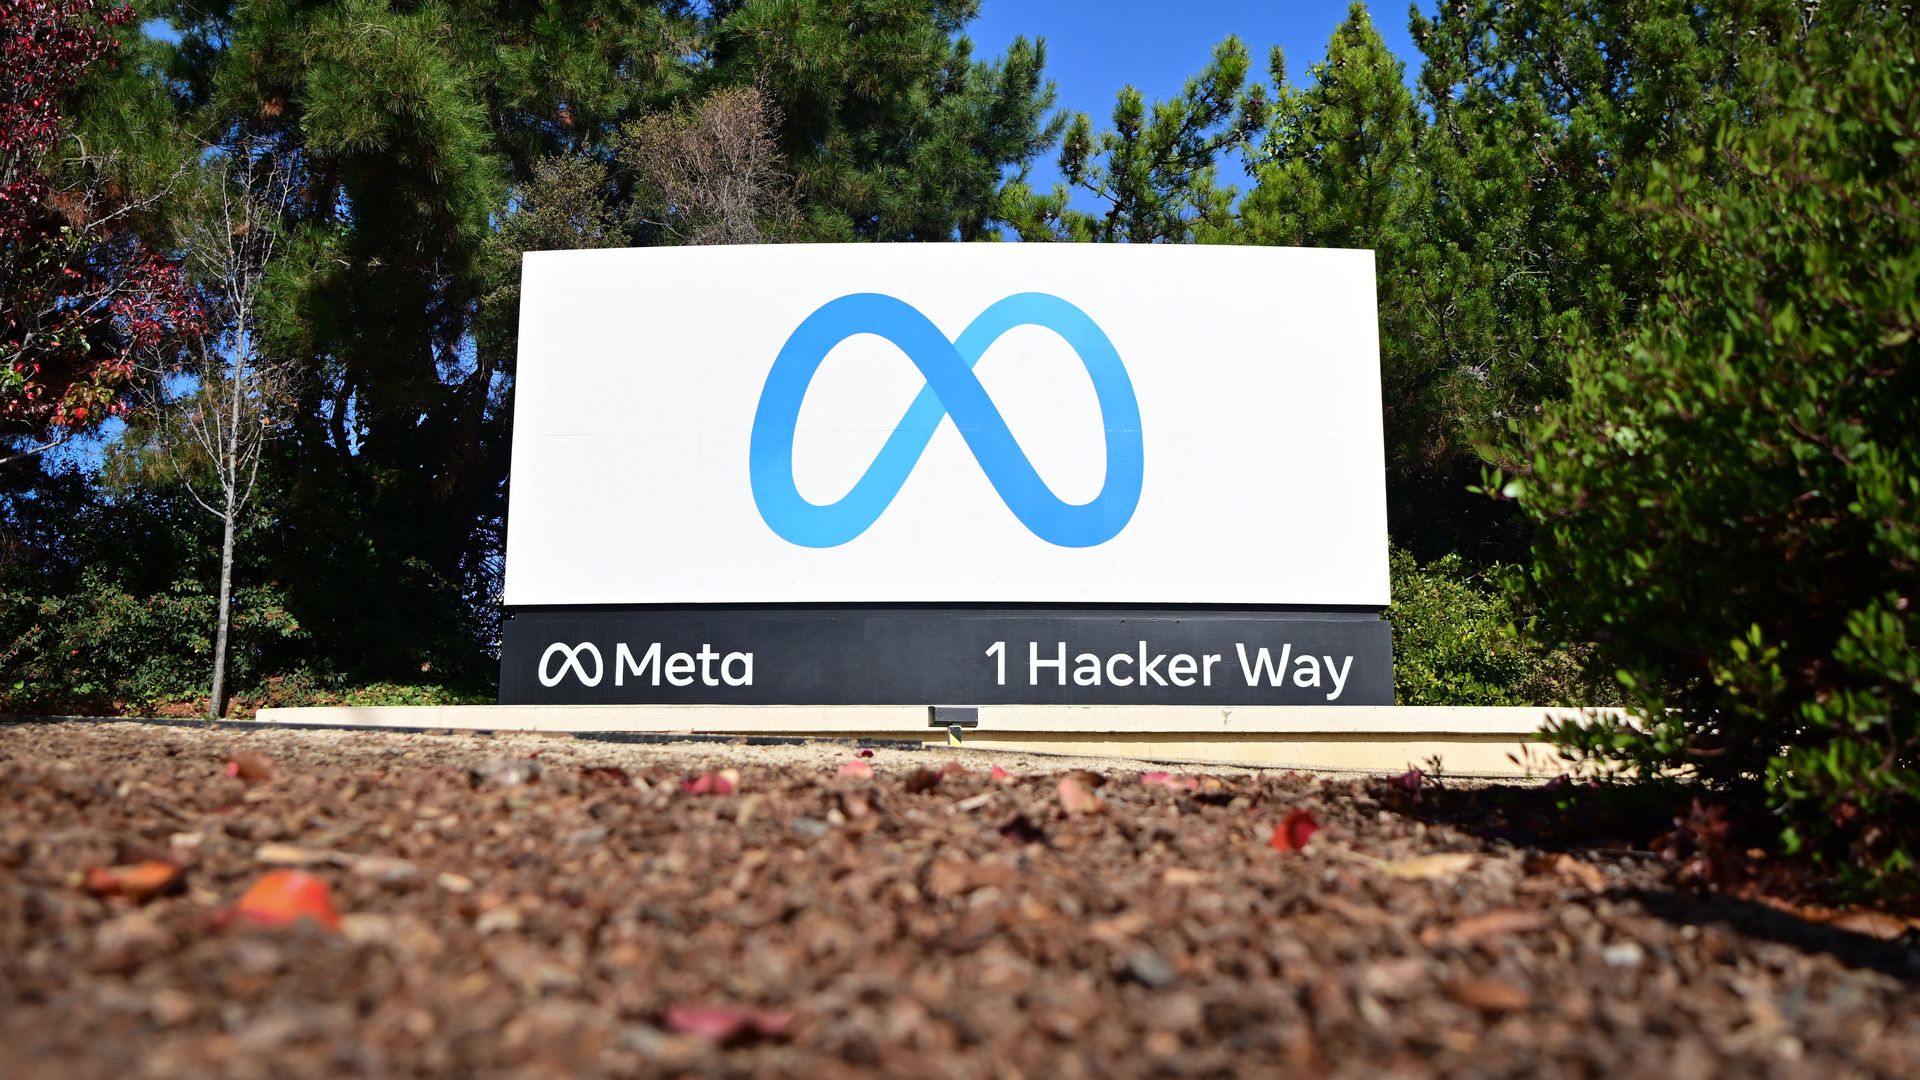 The entrance sign to Meta's office in Silicon Valley